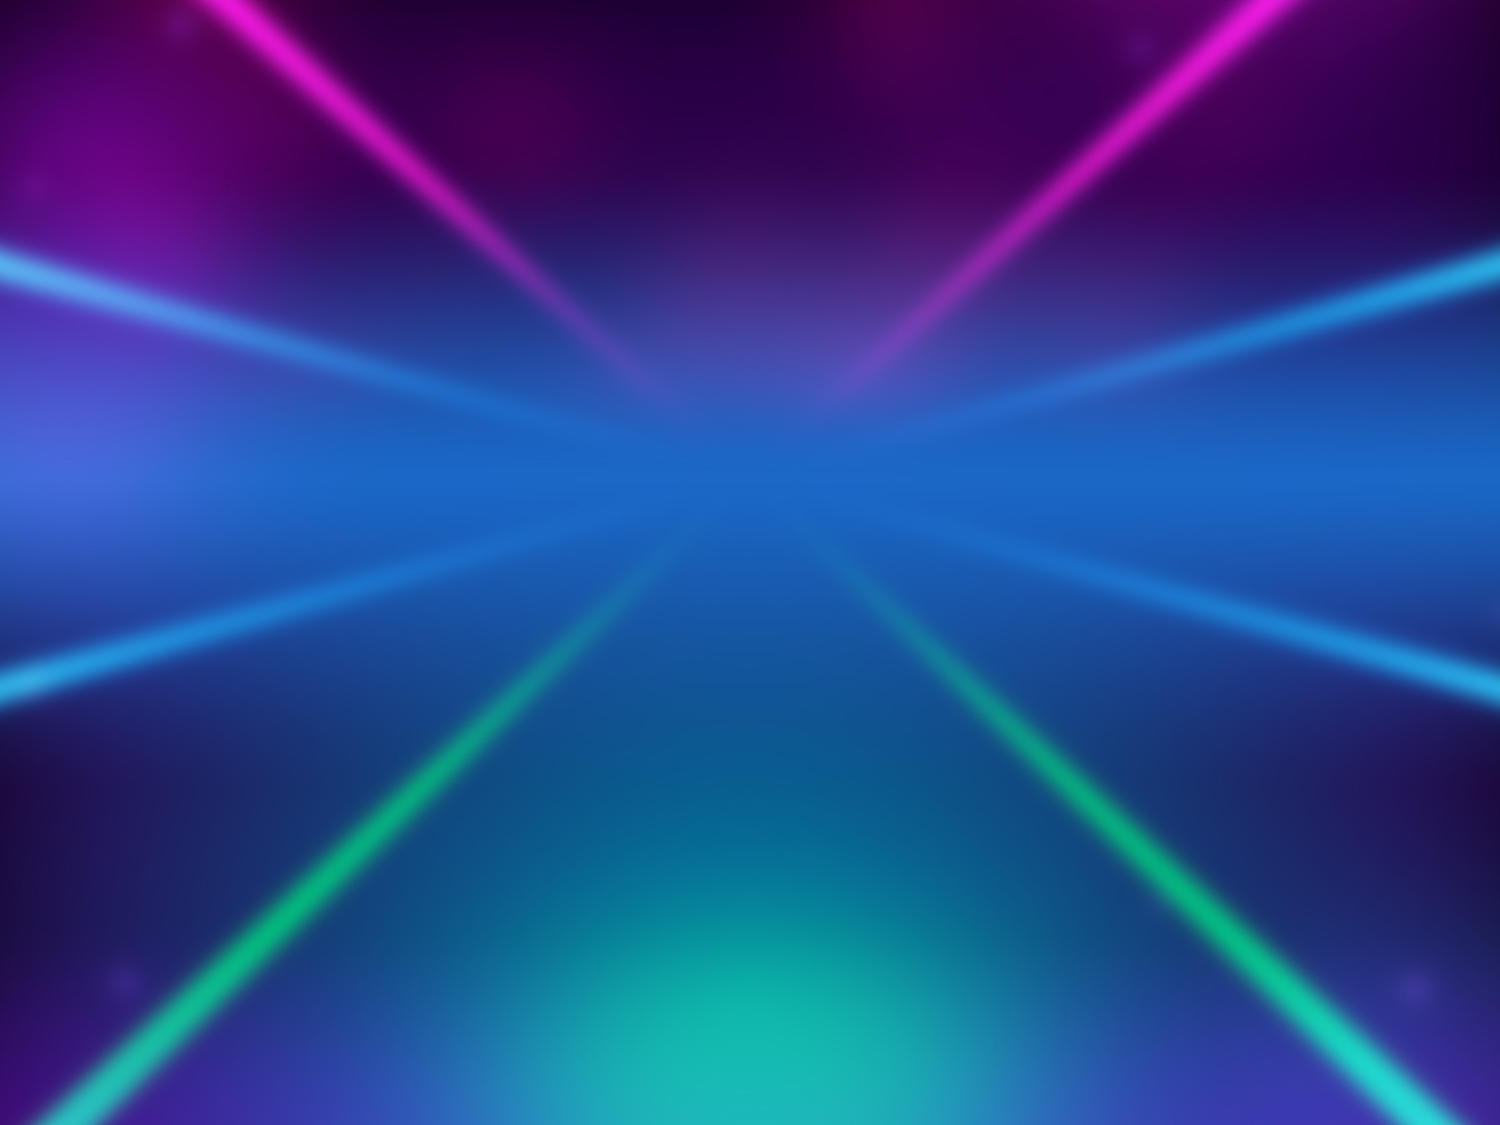 02_background_client_twinspin.jpg thumbnail